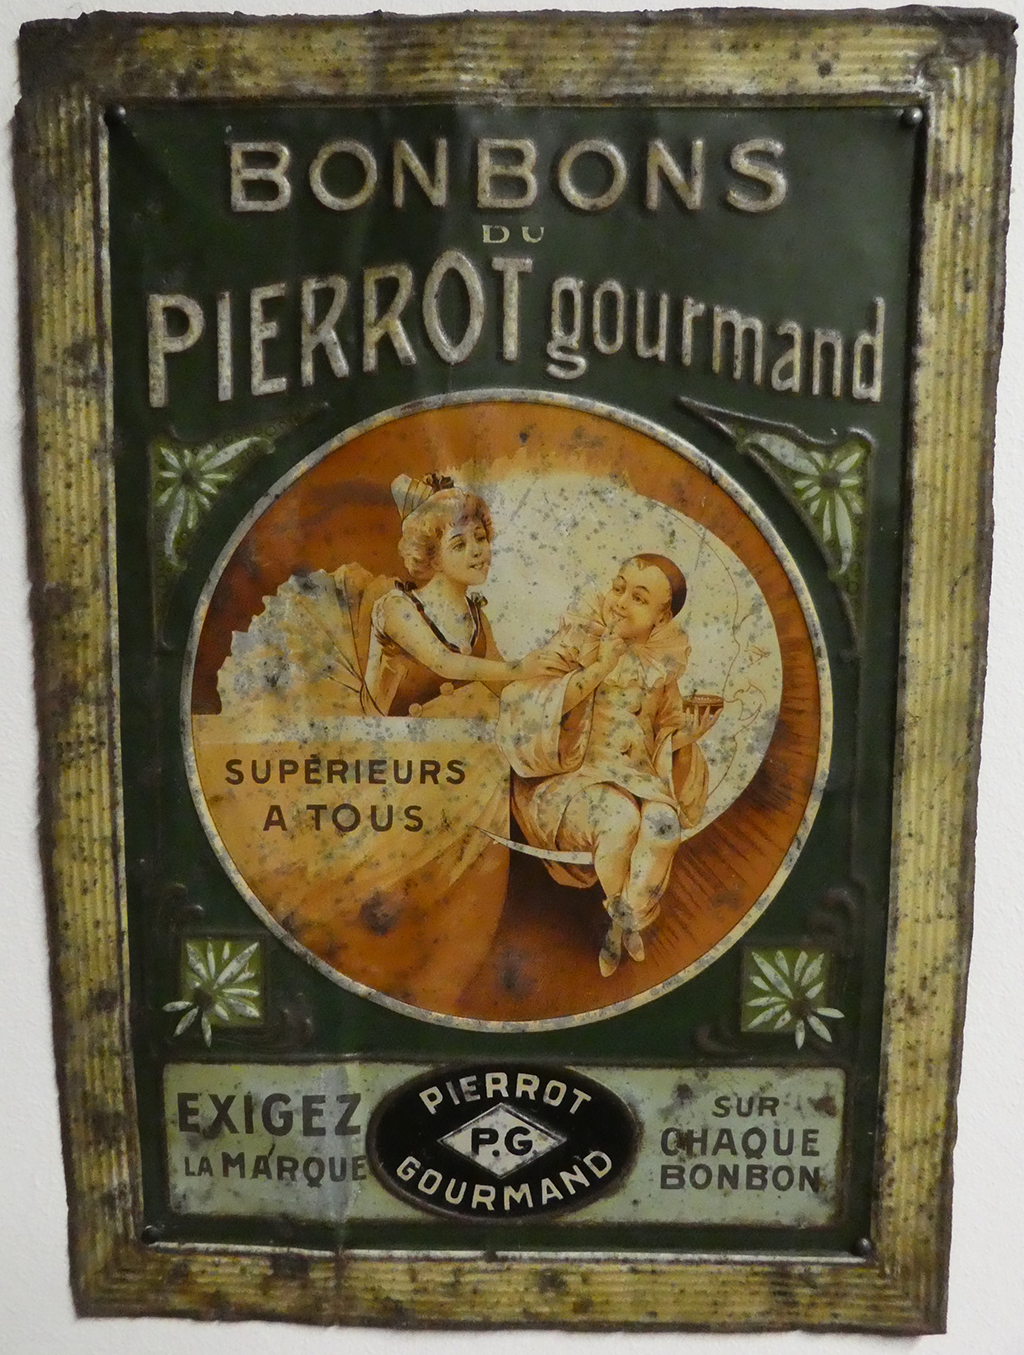 A rectangle cutout of metal with an image that shows a woman holding a child while he sits on a crescent moon with a face. The text at the top states &ldquo;BONBONS DU PIEEROT gourmand&rdquo; The text at the bottom says &ldquo;EXIGEZ LA MARQUE - SUR OHAQUE BONBON&rdquo;